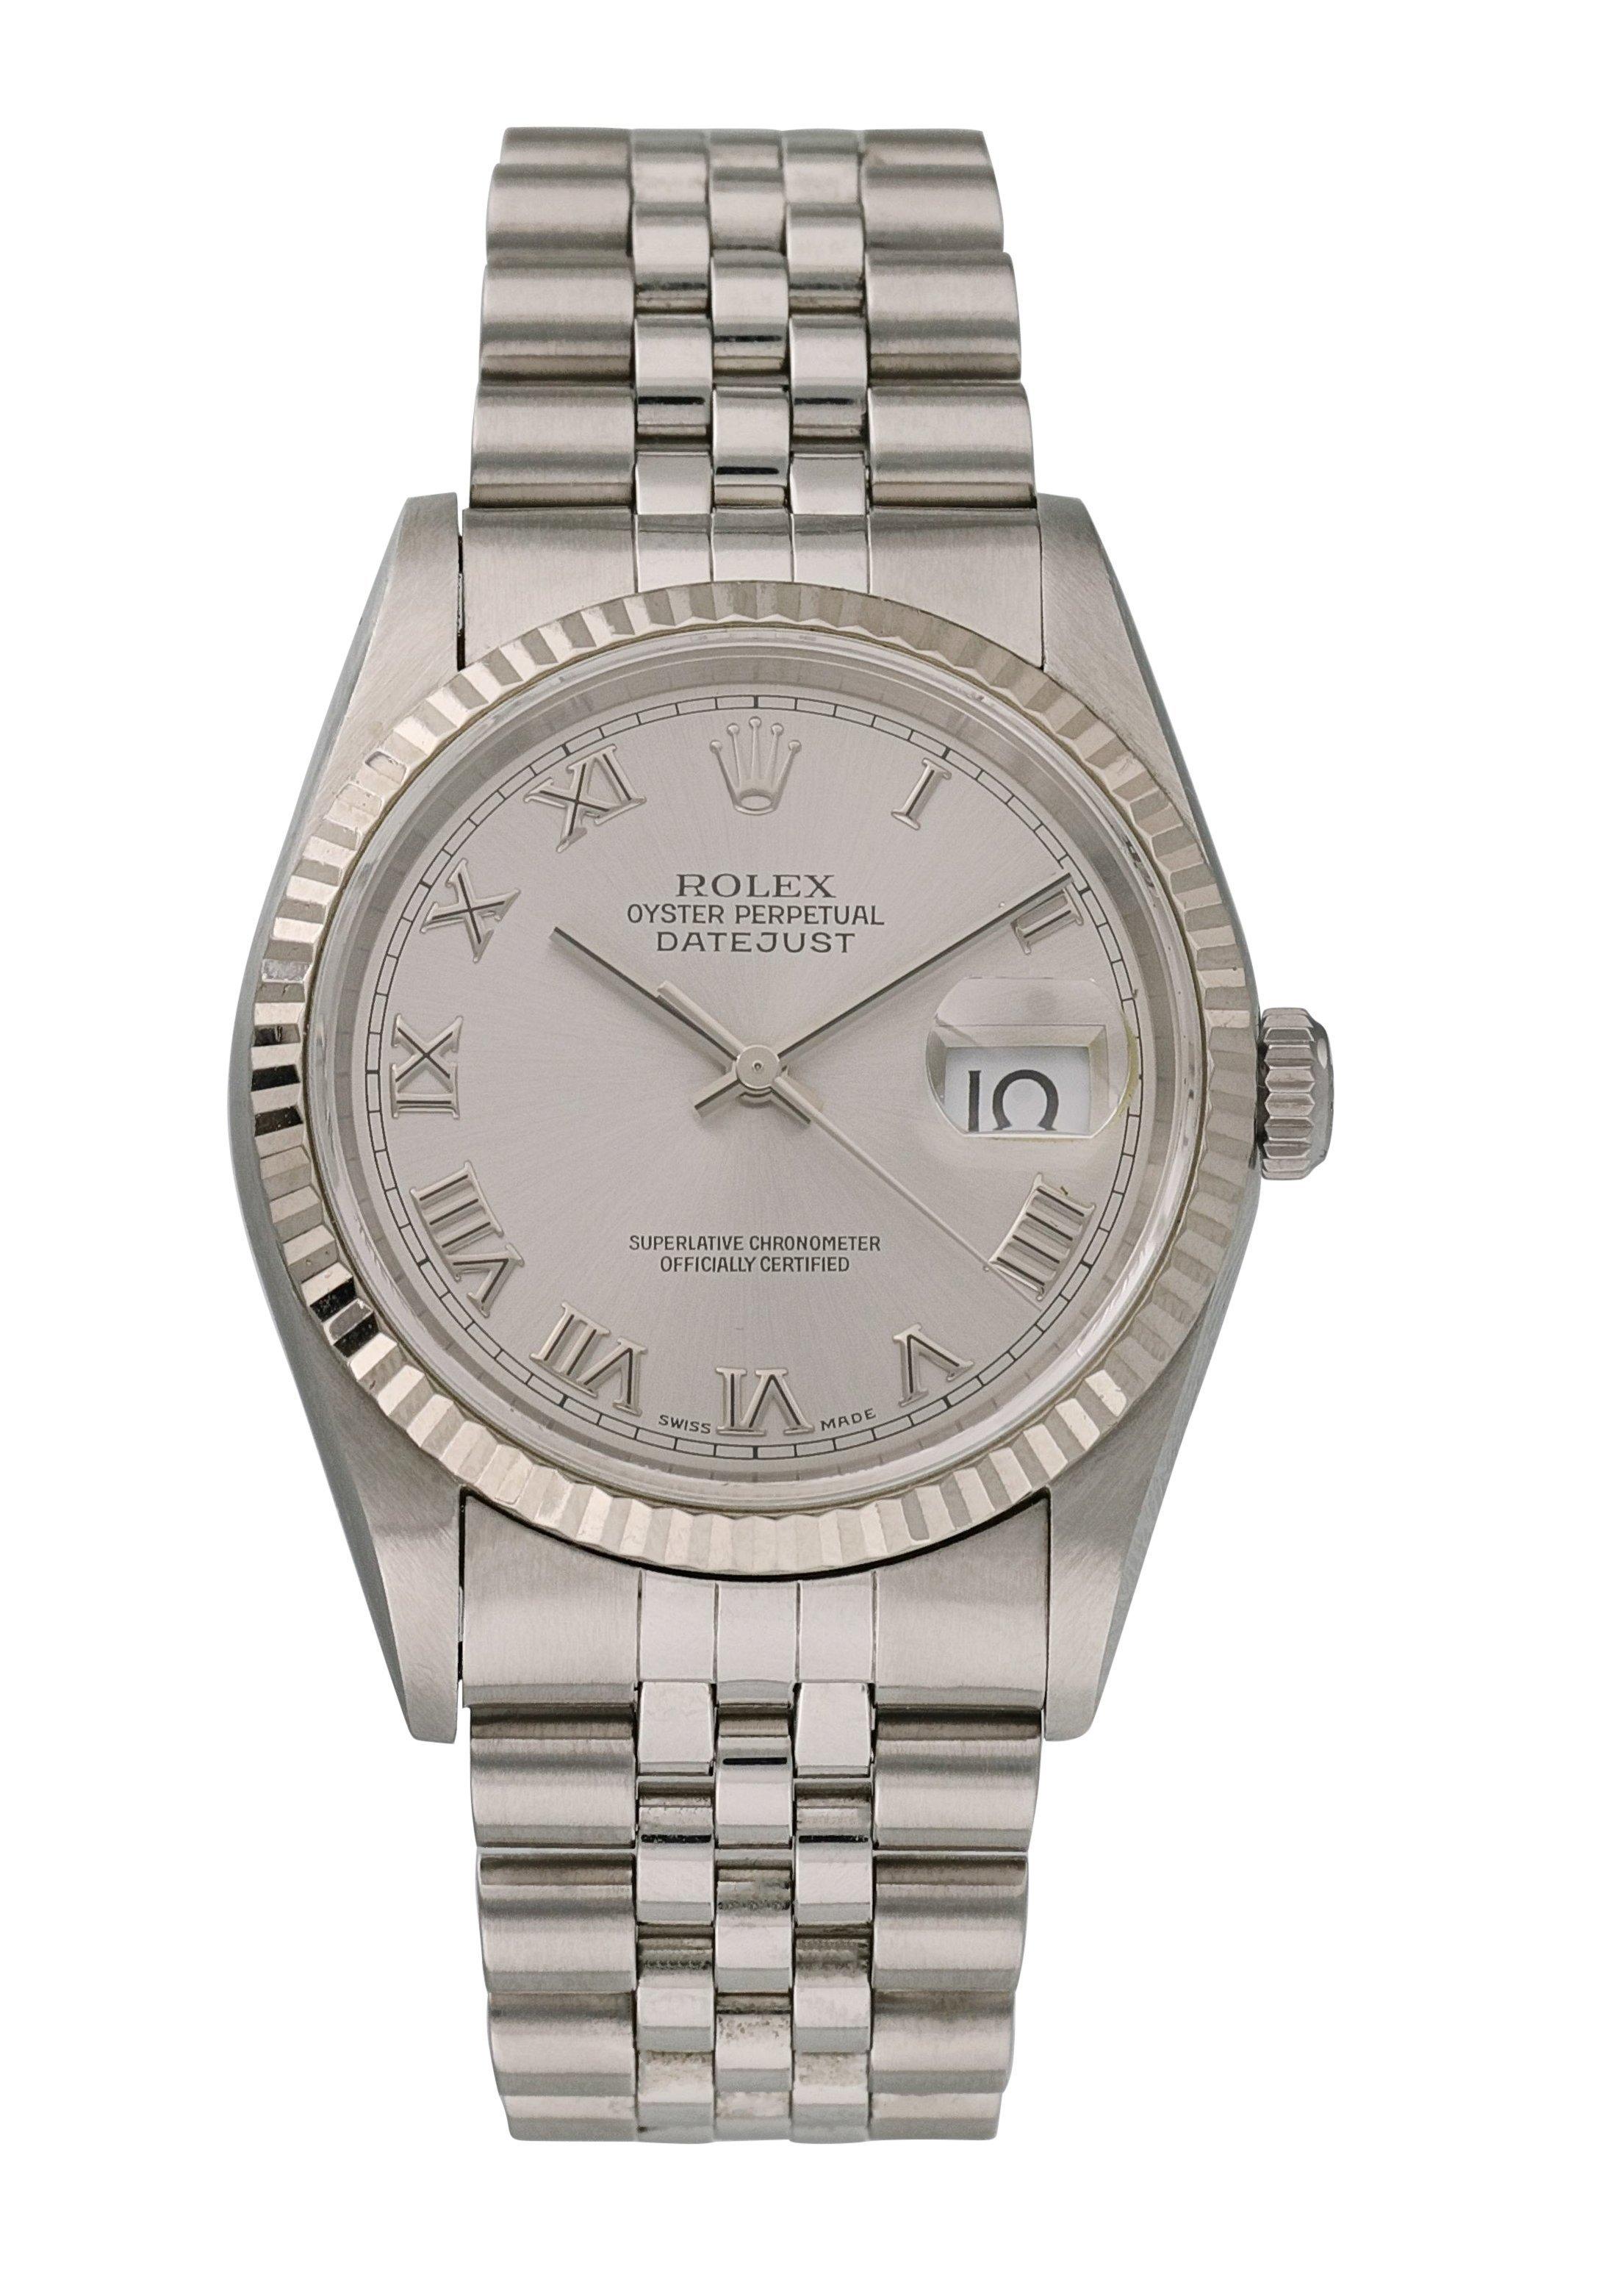 Rolex Datejust 16234 Men watch. 
36 Stainless Steel case. 
White Gold fluted bezel. 
Silver dial with Luminous Steel hands and index hour markers Minute markers on the outer dial. 
Date display at the 3 o'clock position. 
Stainless Steel Bracelet